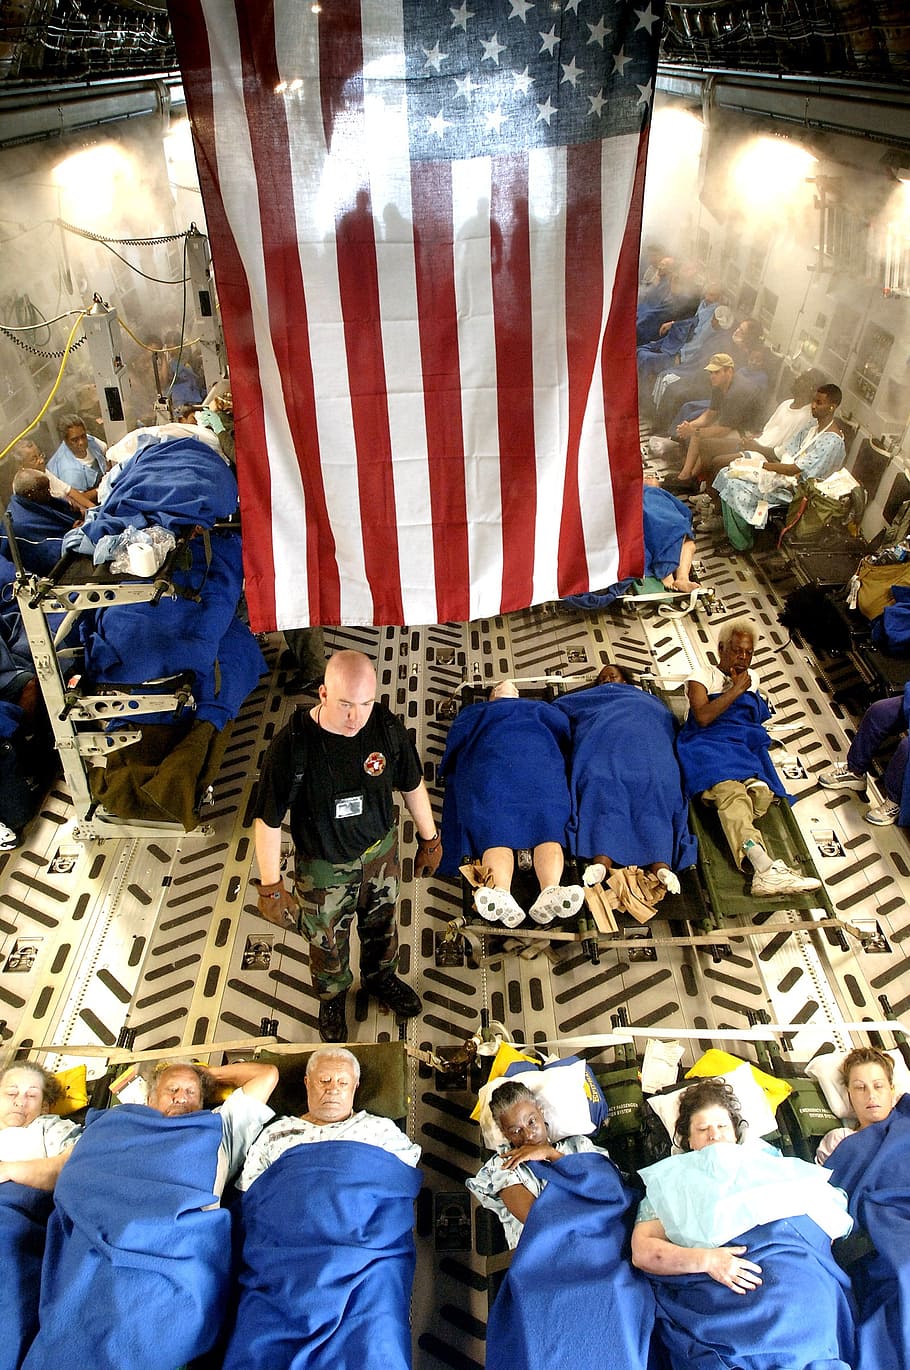 aircraft, plane, air force, hurricane katrina victims, airlift, medical evacuation, personnel, victims, patients, cots